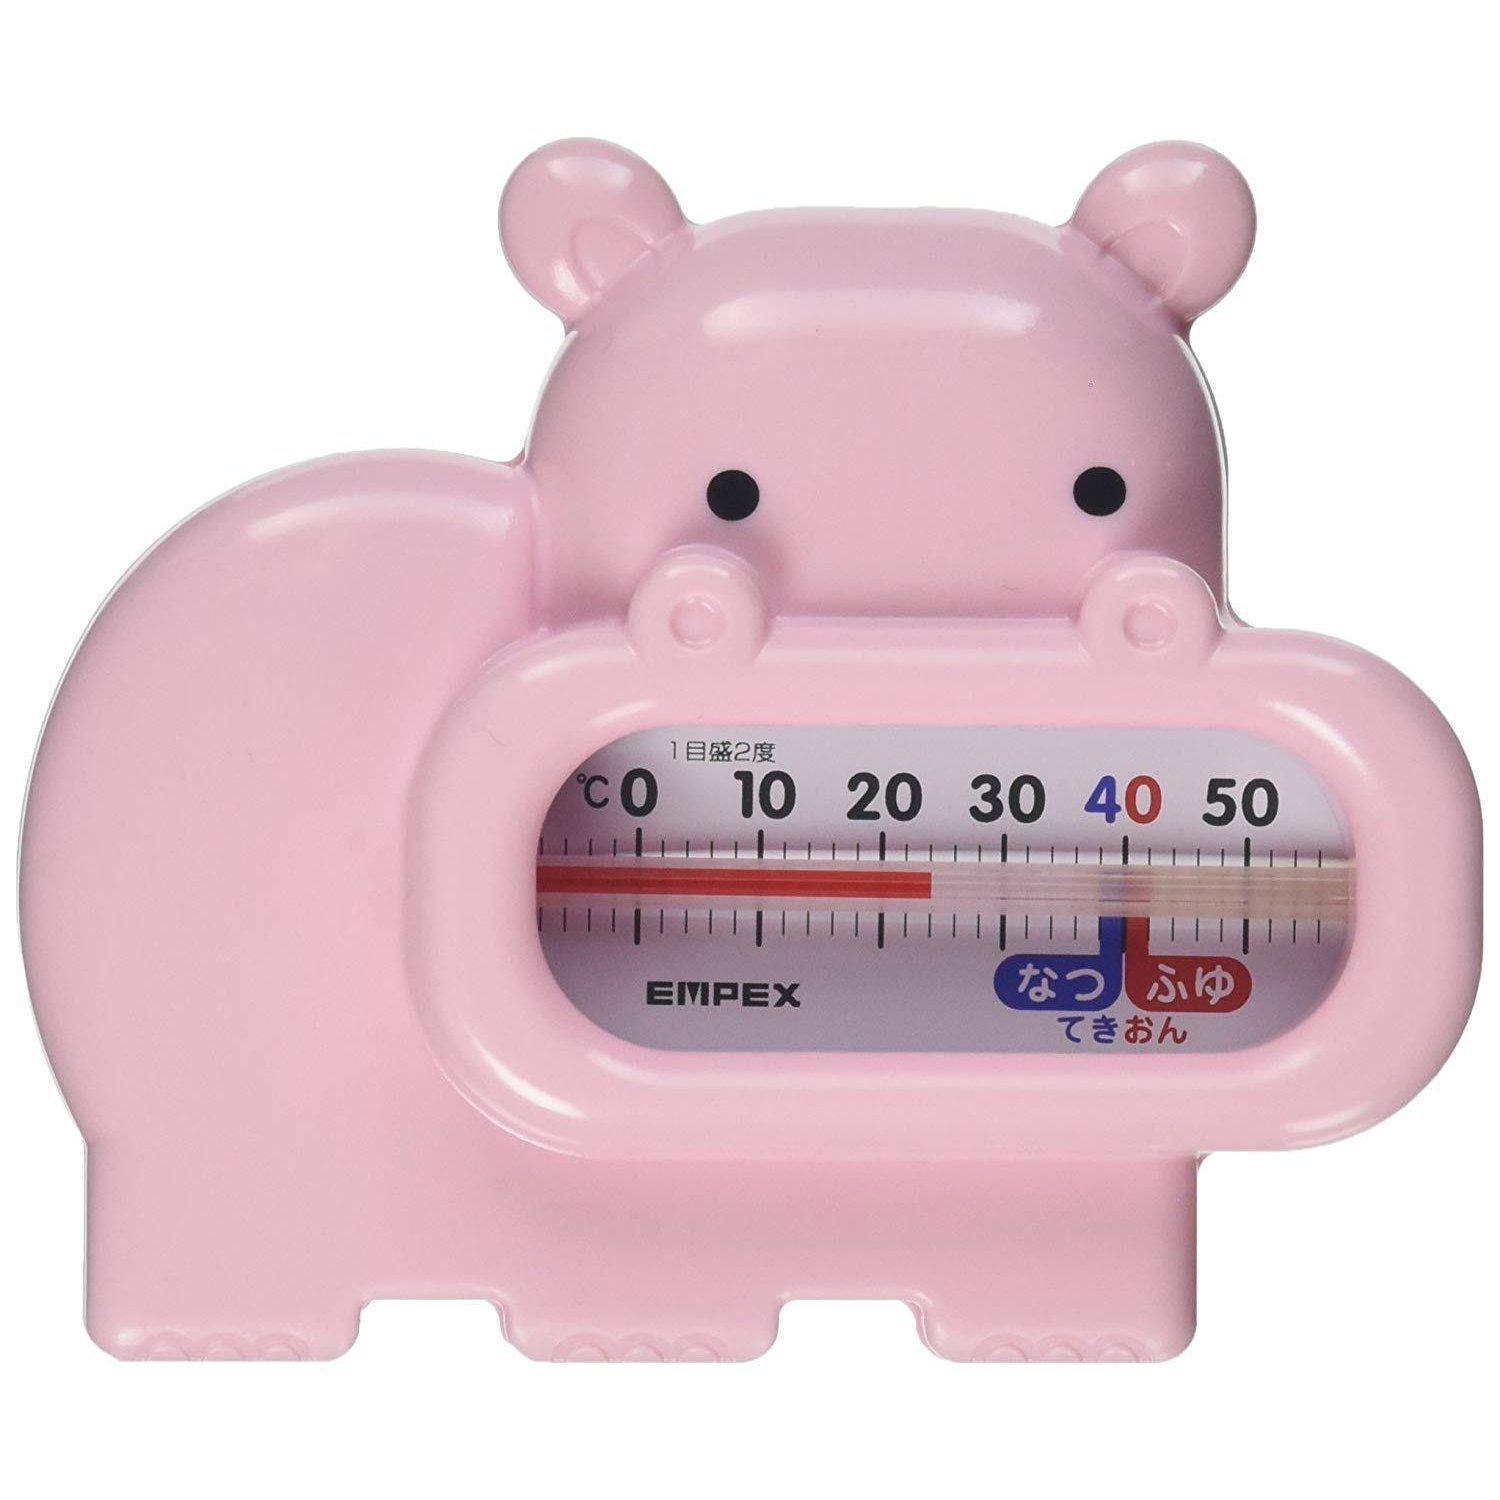 Empex Floating Hippopotamus Toy and Baby Bath Thermometer TG - 5133